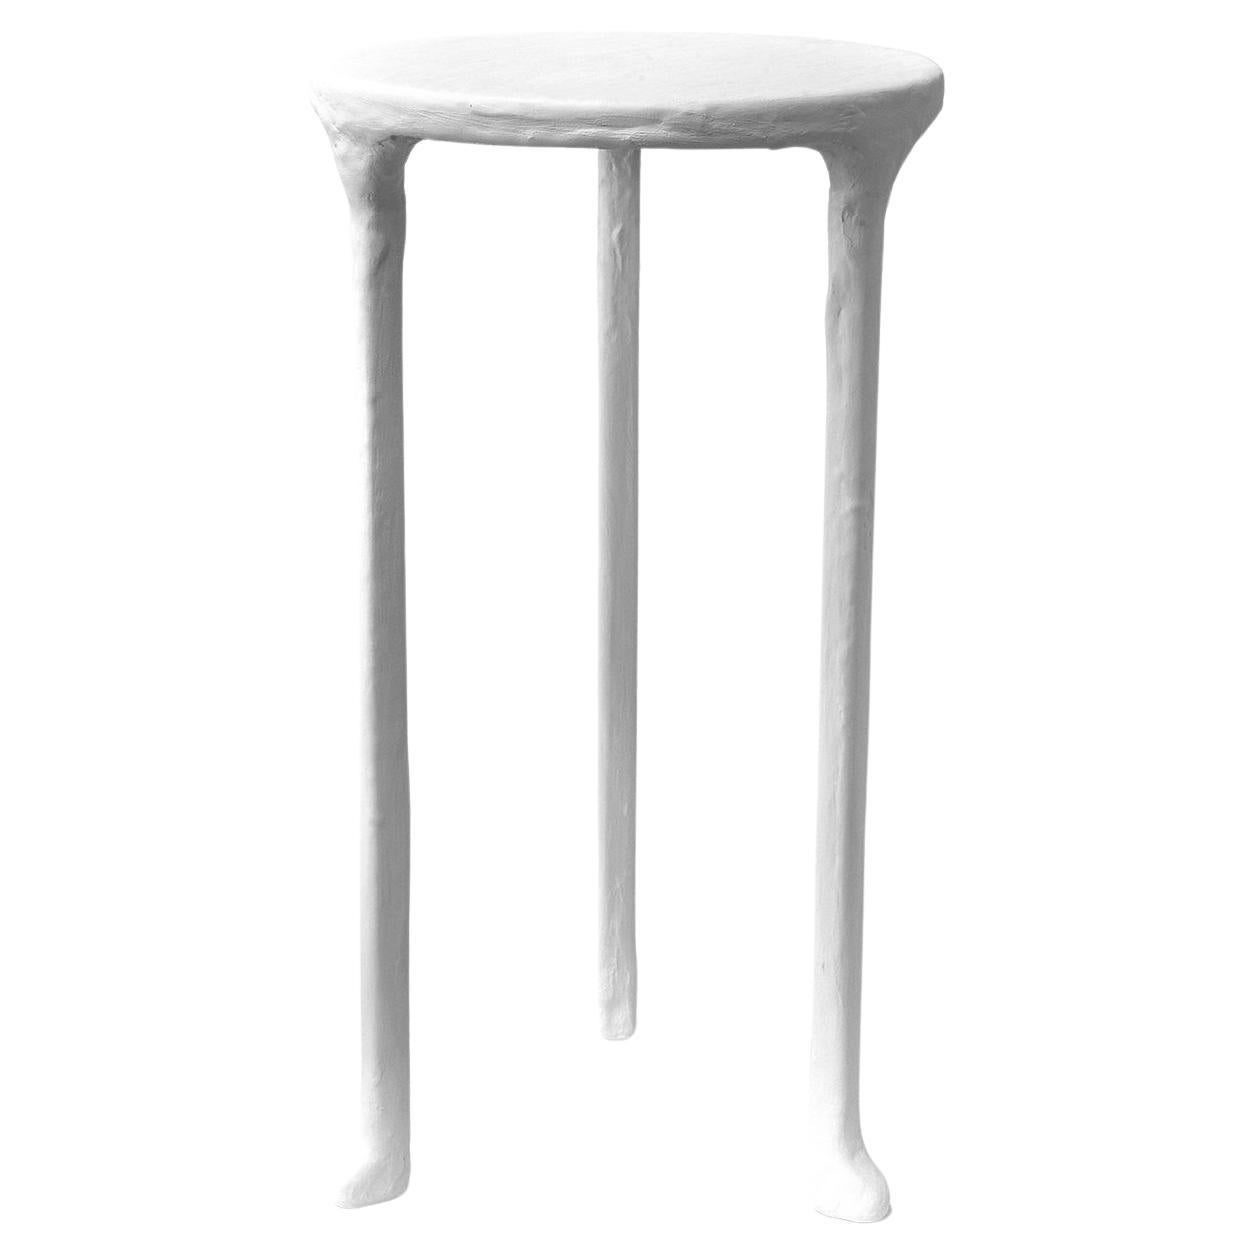 Side Table Classic Modern White Plaster and Steel Minimalist Hand-Shaped Contemp For Sale